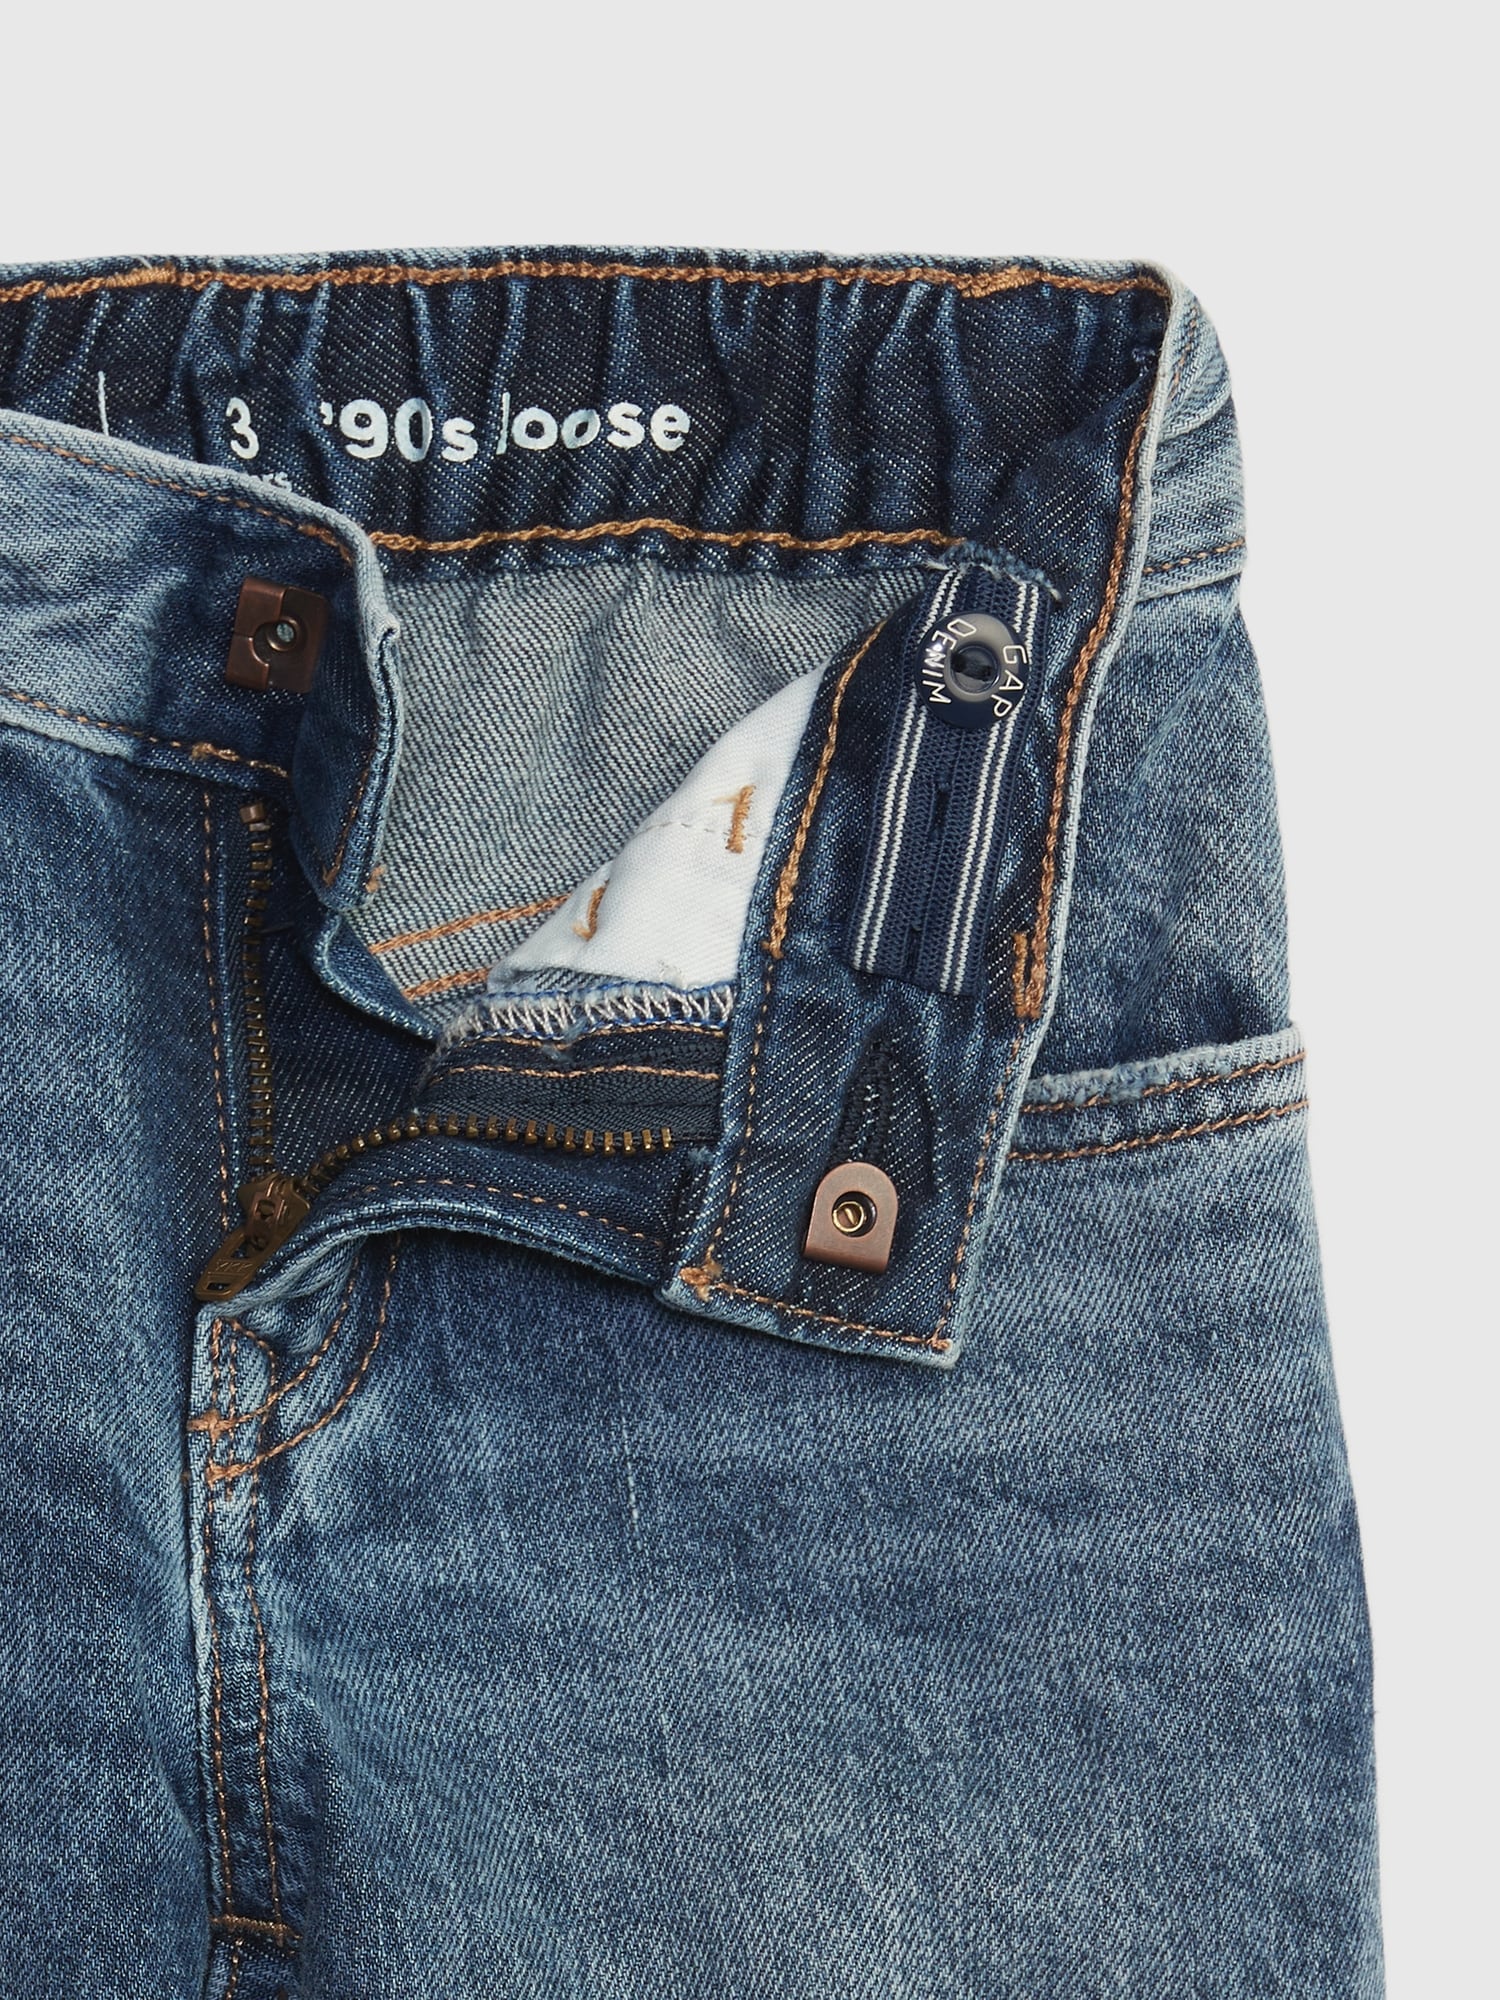 Toddler '90s Loose Organic Denim Jeans with Washwell | Gap